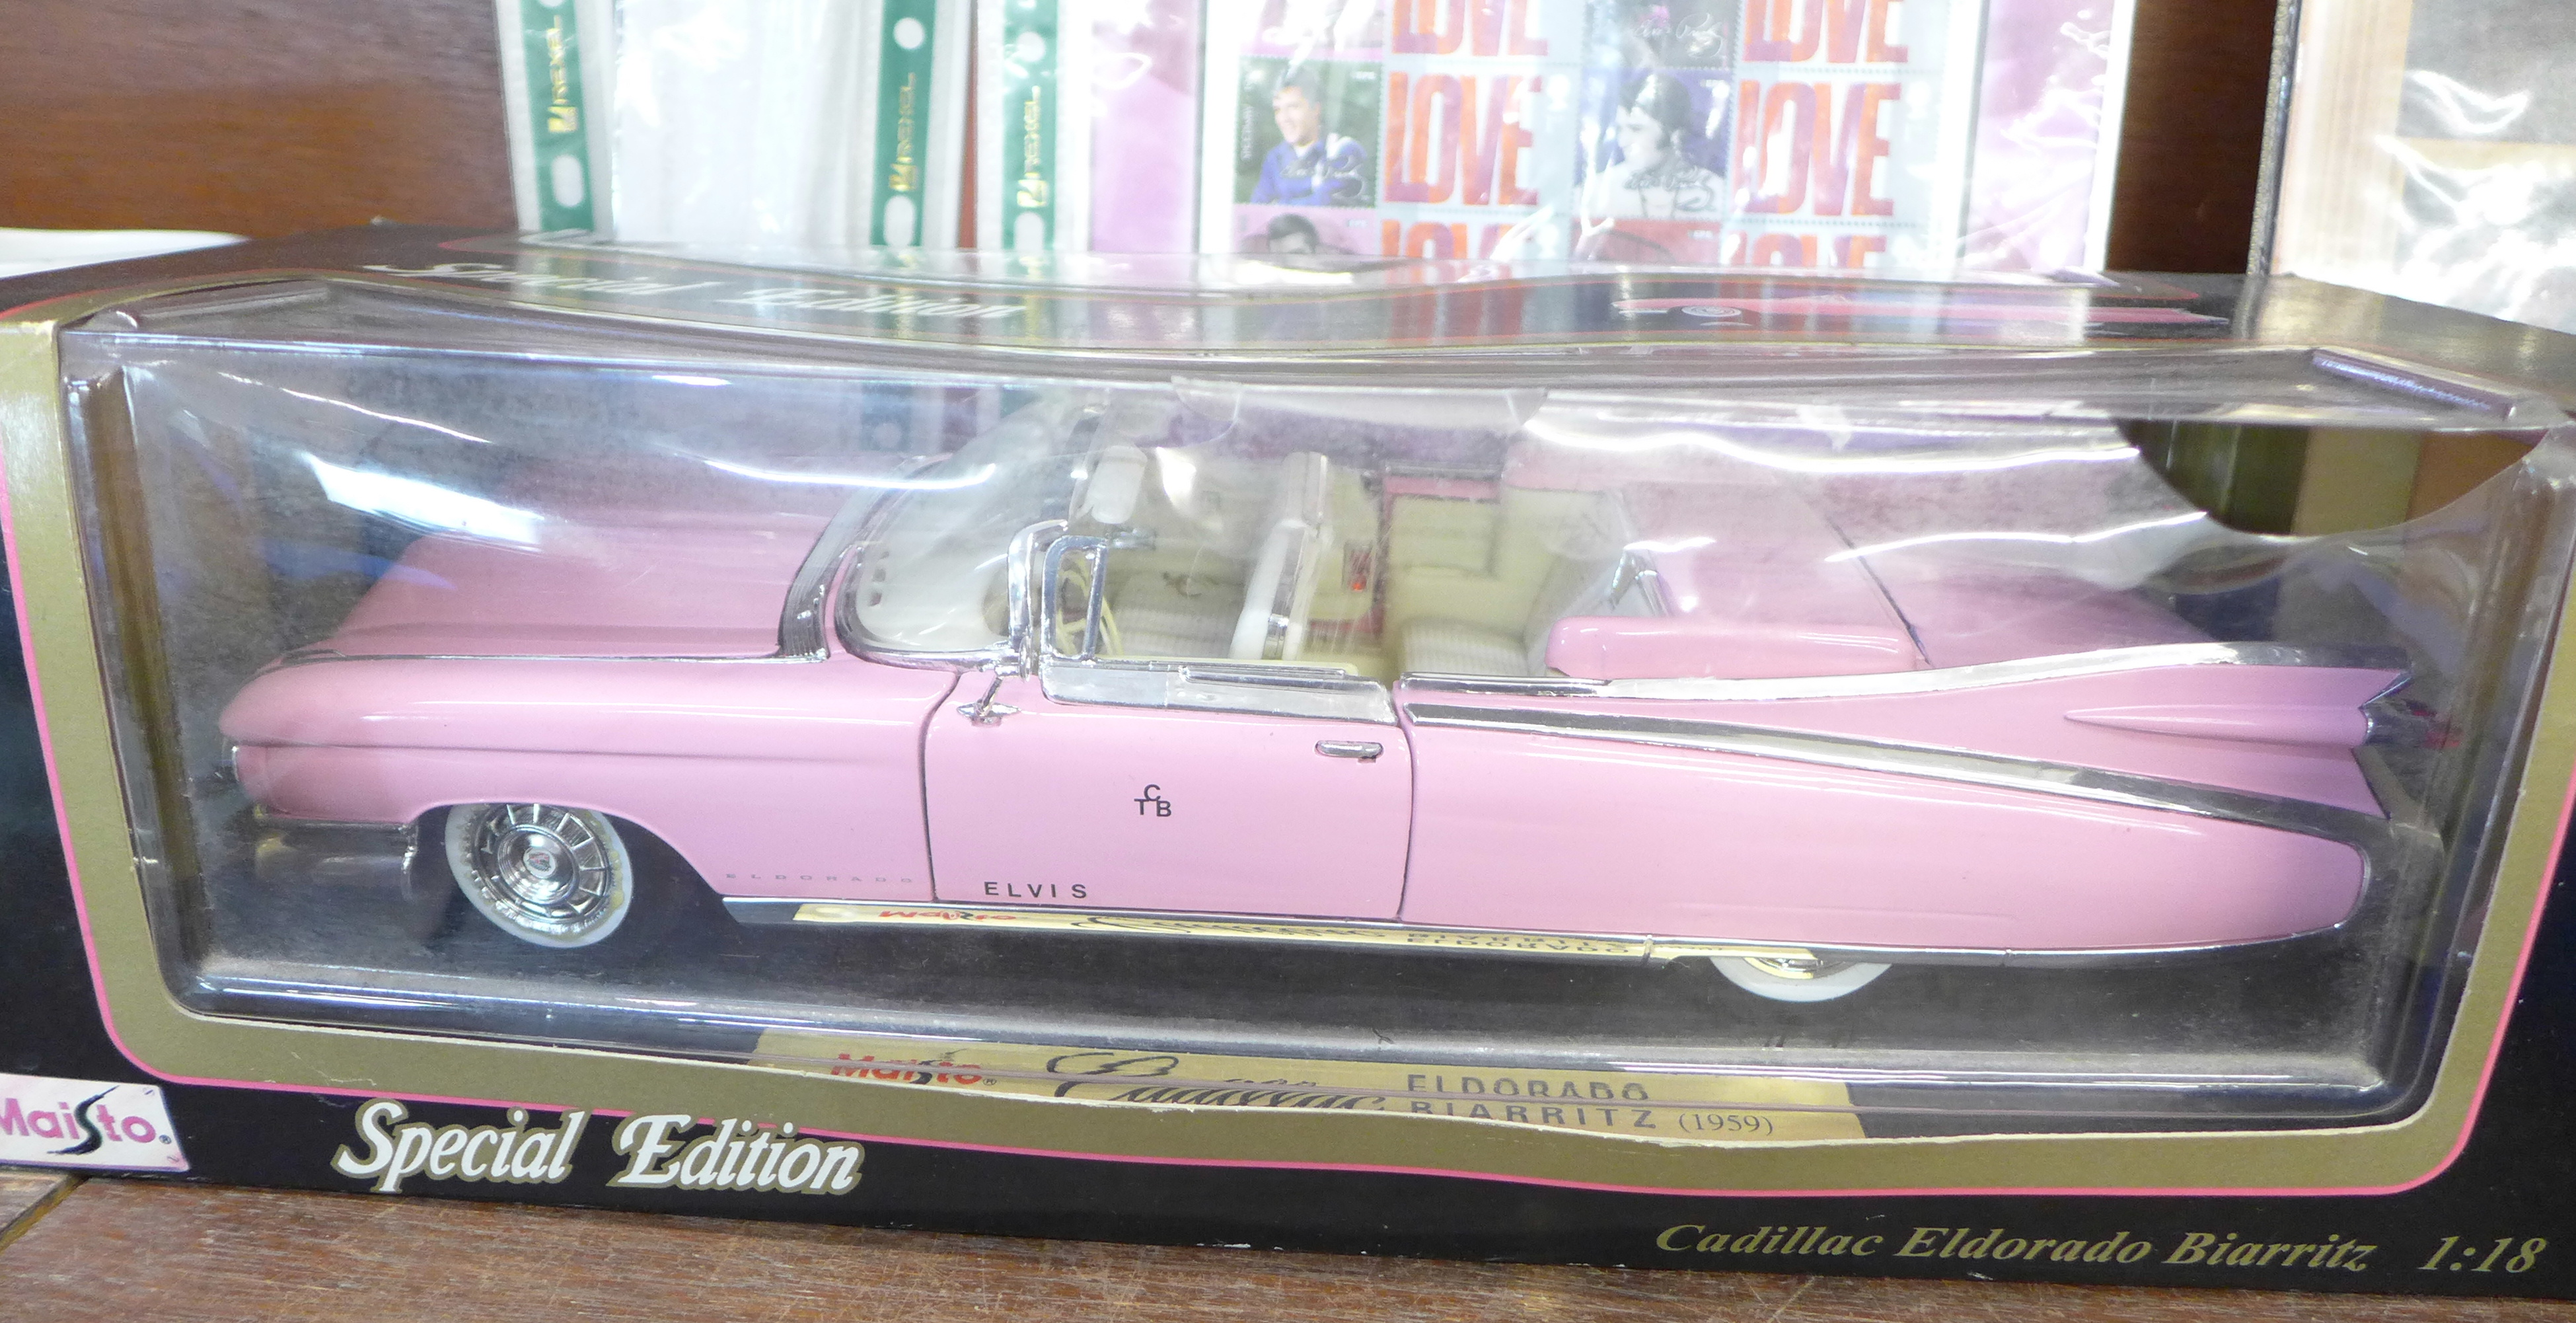 A Maisto model Cadillac in pink, Eldorado Biarritz, 1959, boxed and a collection of four Elvis